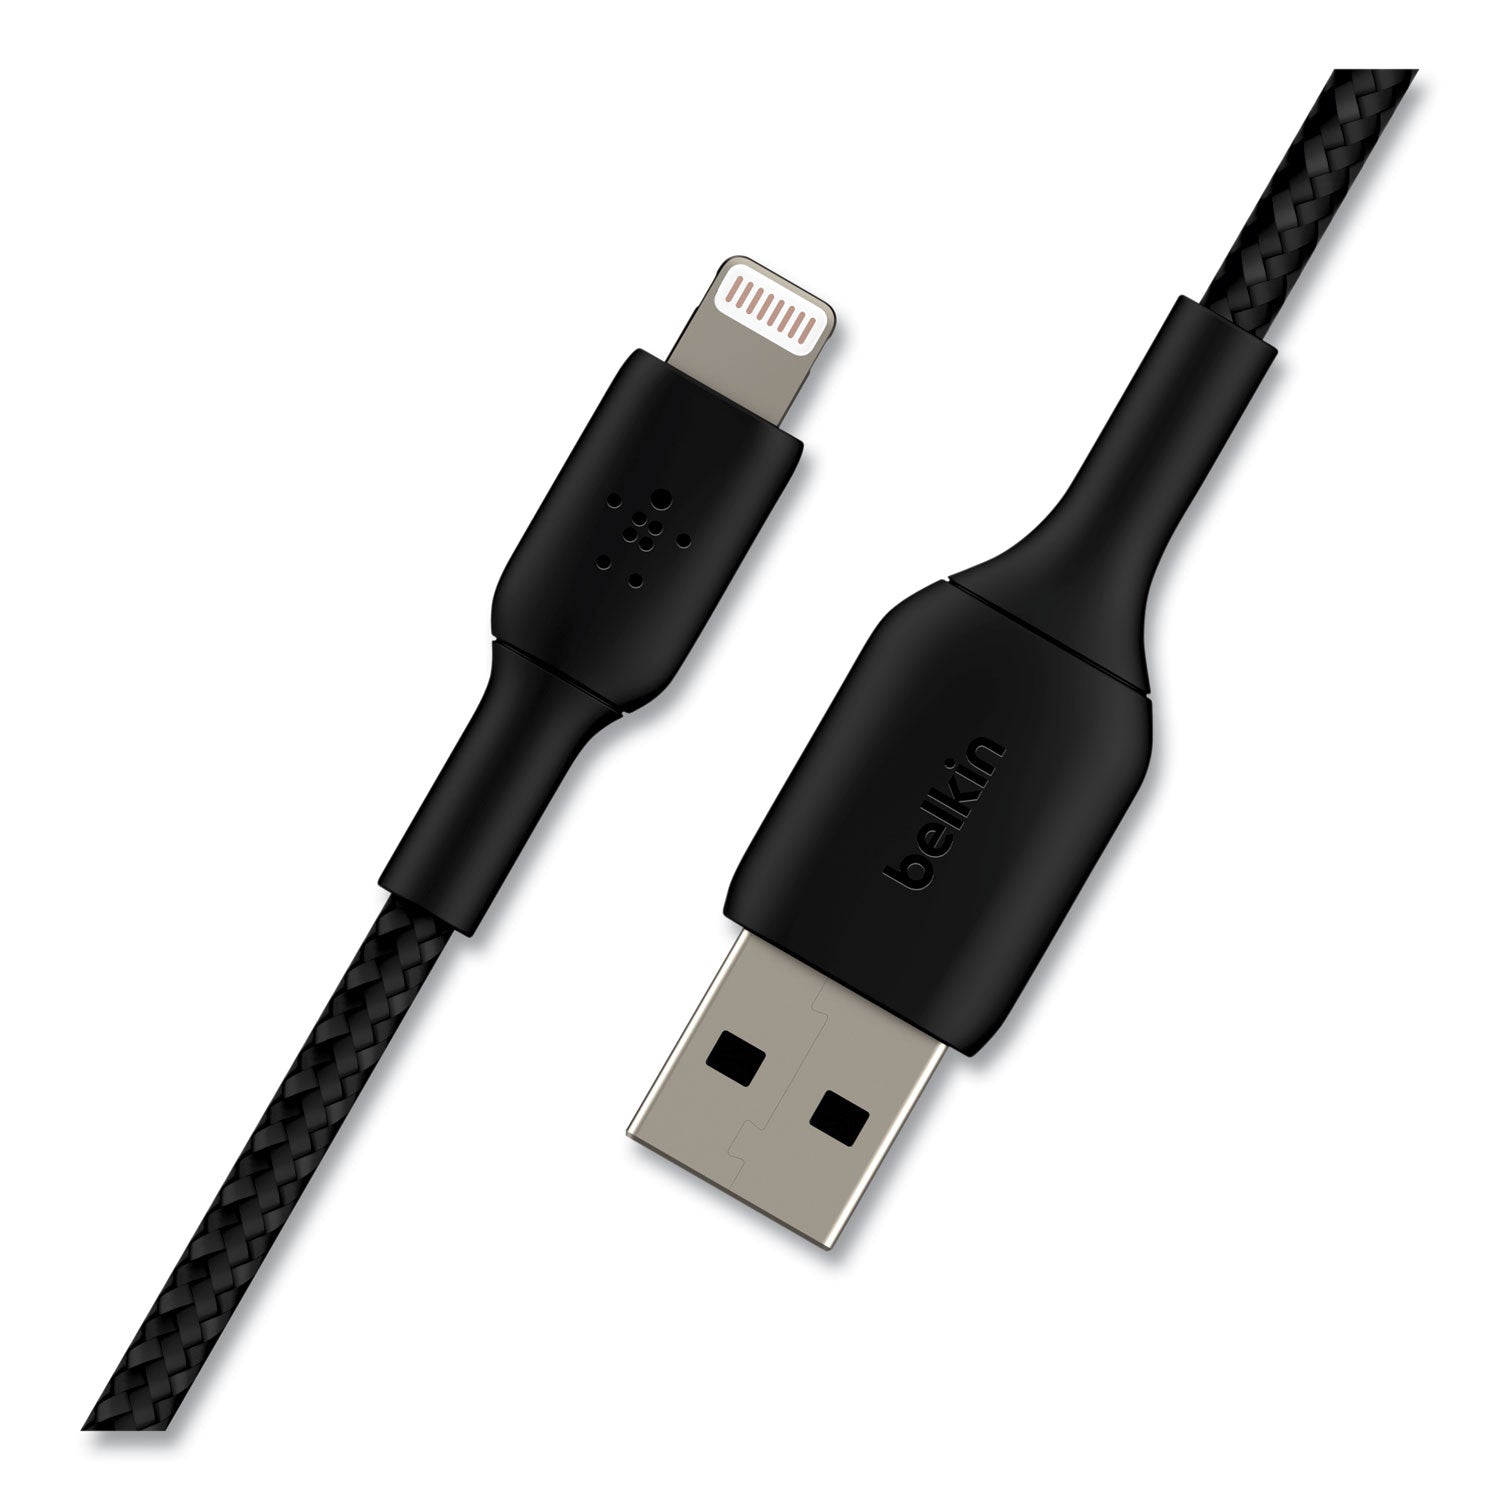 boost-charge-braided-apple-lightning-to-usb-a-chargesync-cable-66-ft-black_blkcaa002bt2mbk - 5